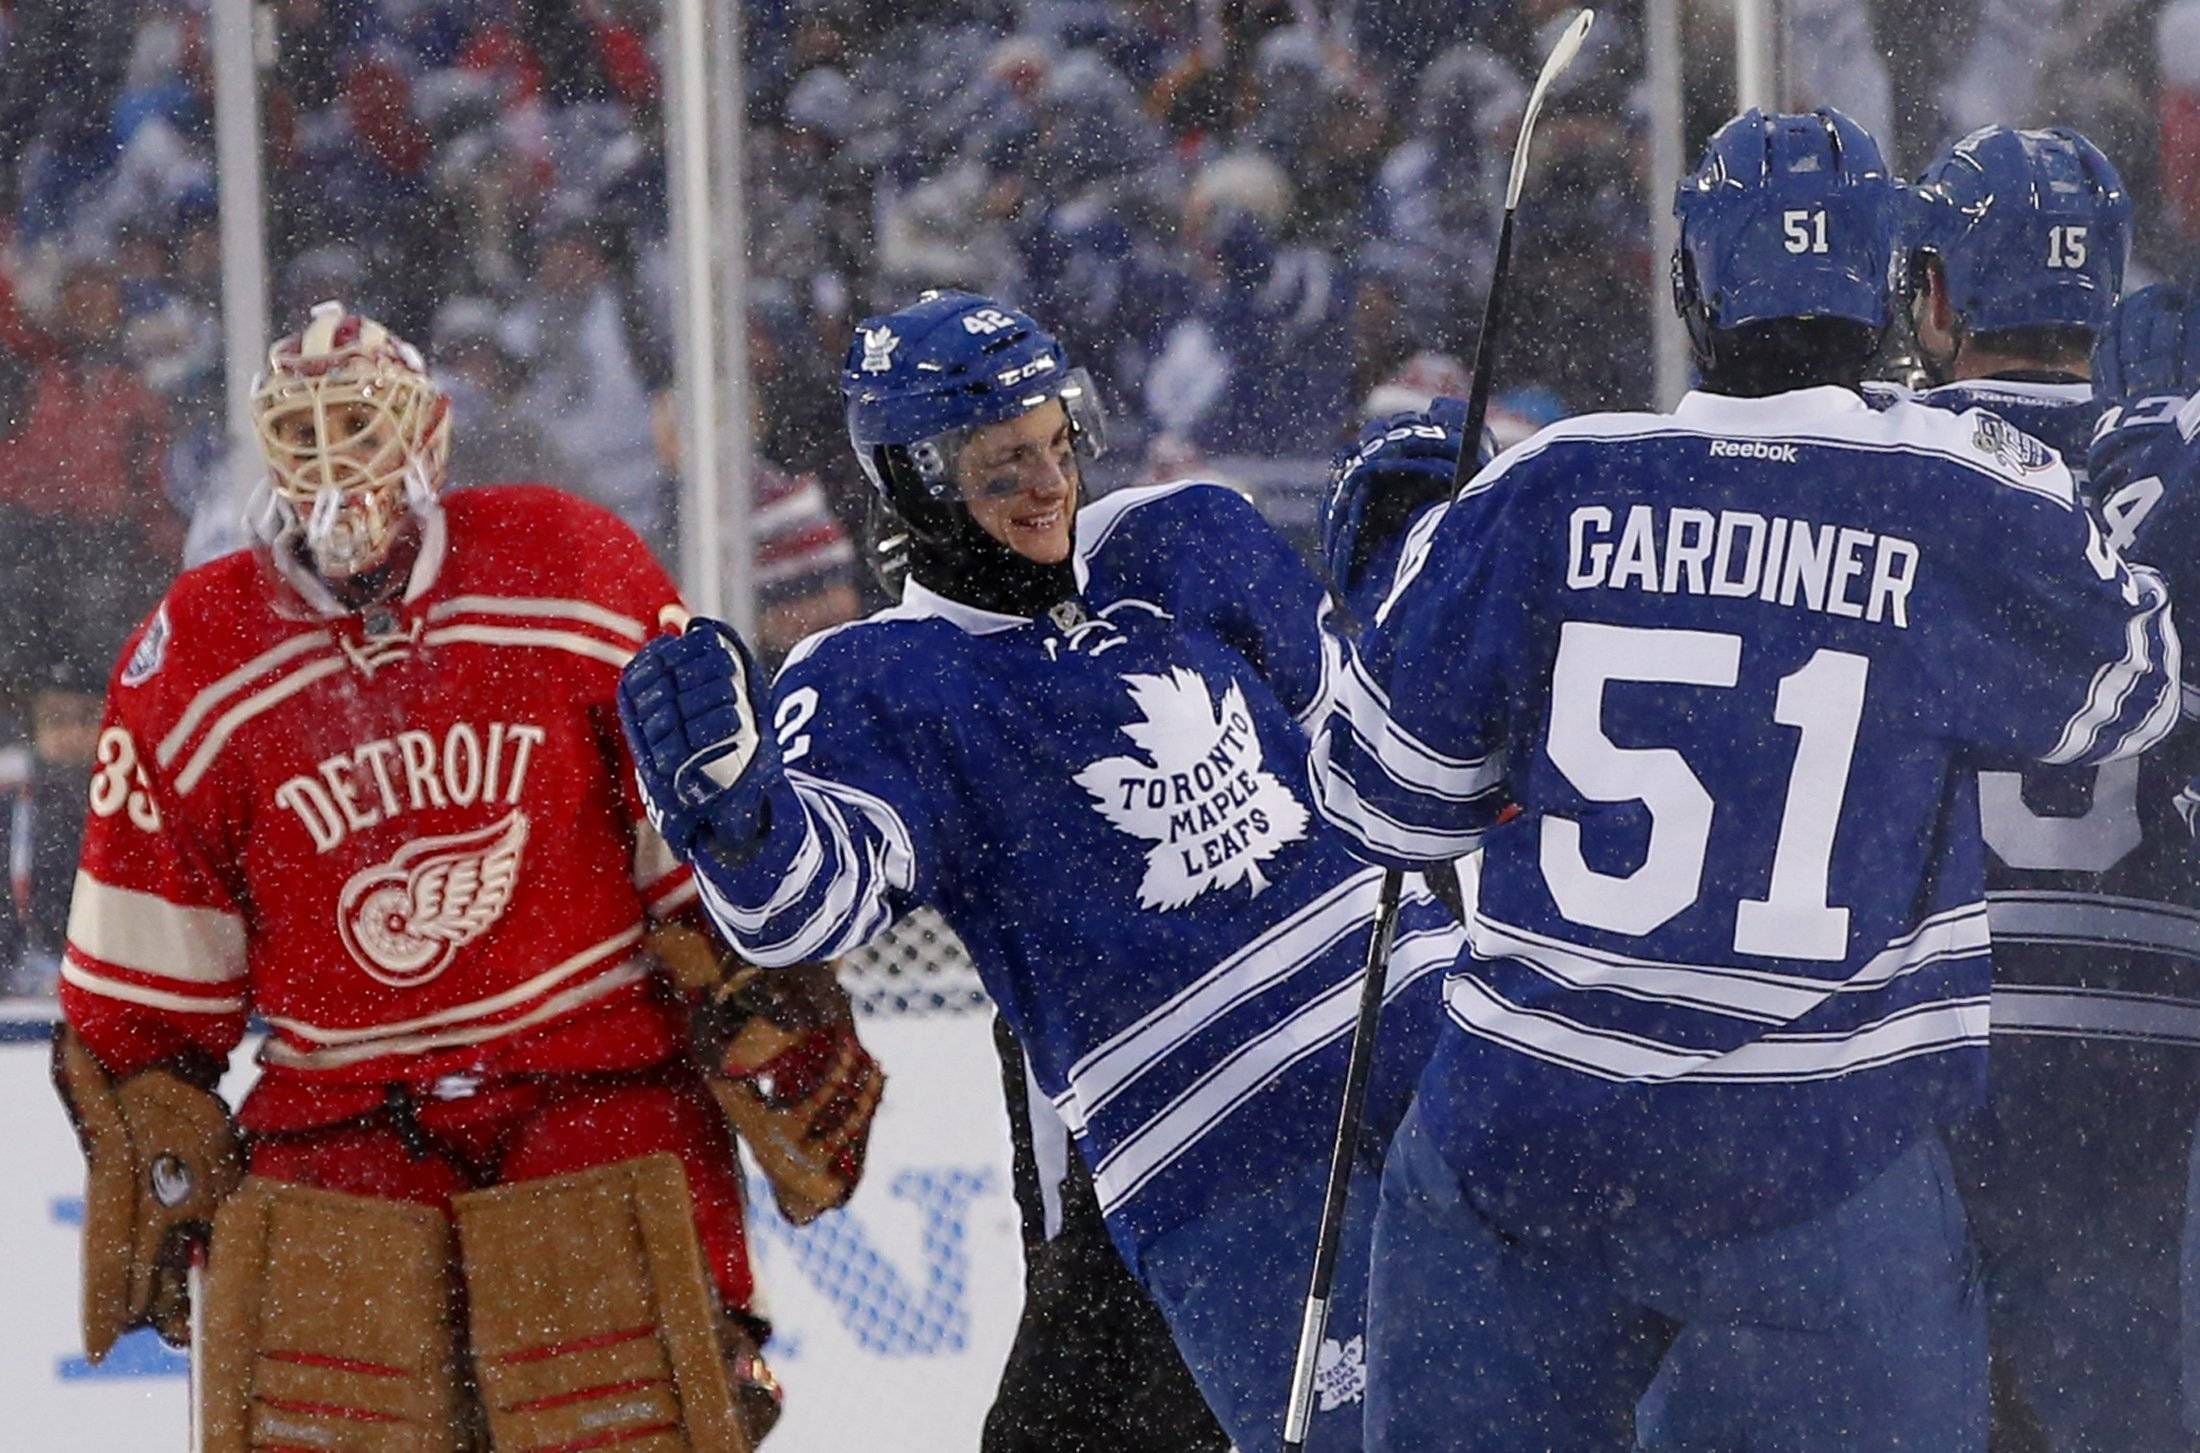 Toronto Maple Leafs win 2014 Winter Classic as over 100,000 ice hockey fans  wrap up warm for stunning snowy spectacle